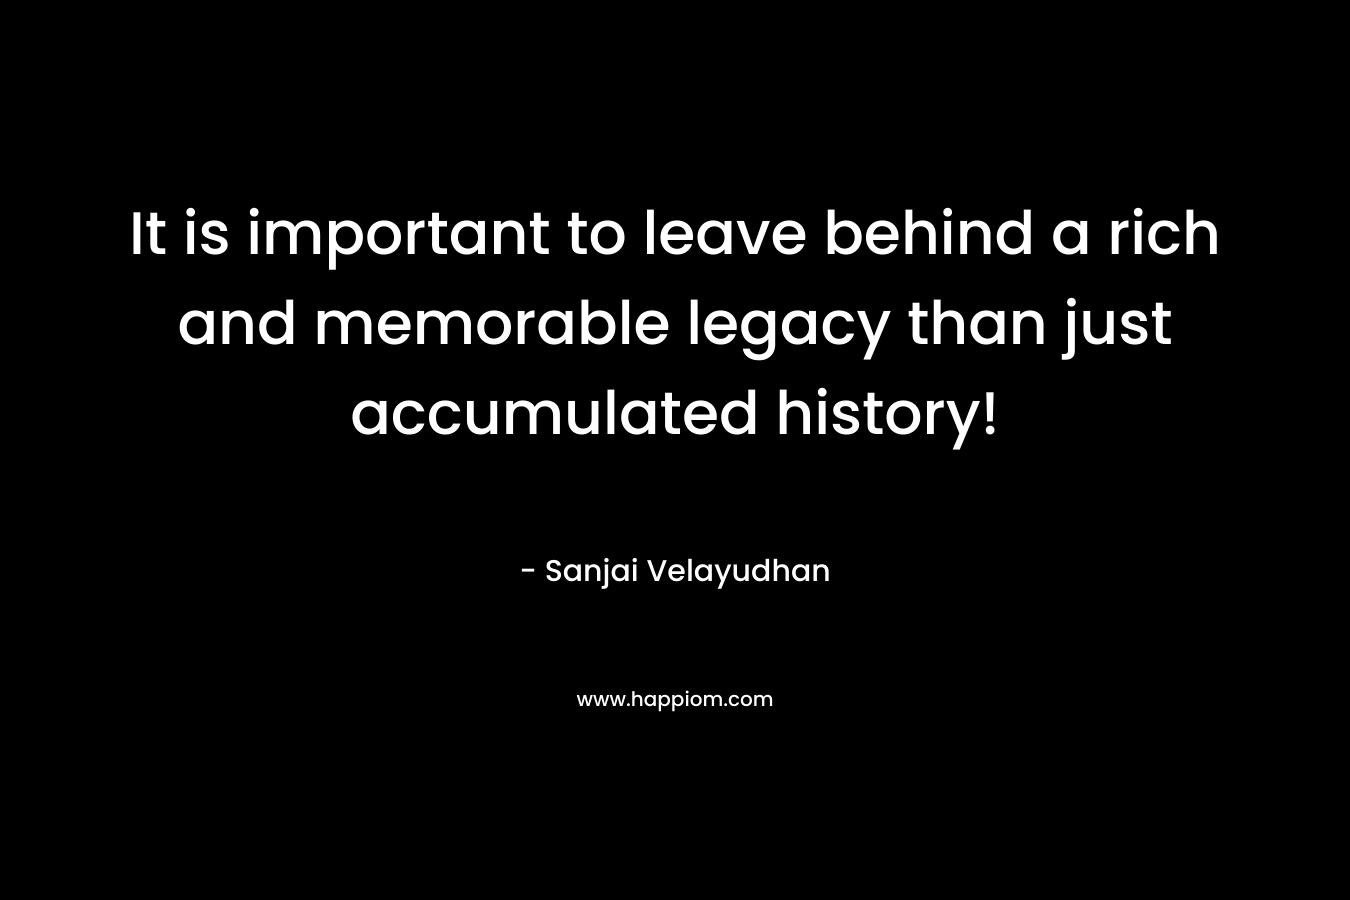 It is important to leave behind a rich and memorable legacy than just accumulated history! – Sanjai Velayudhan